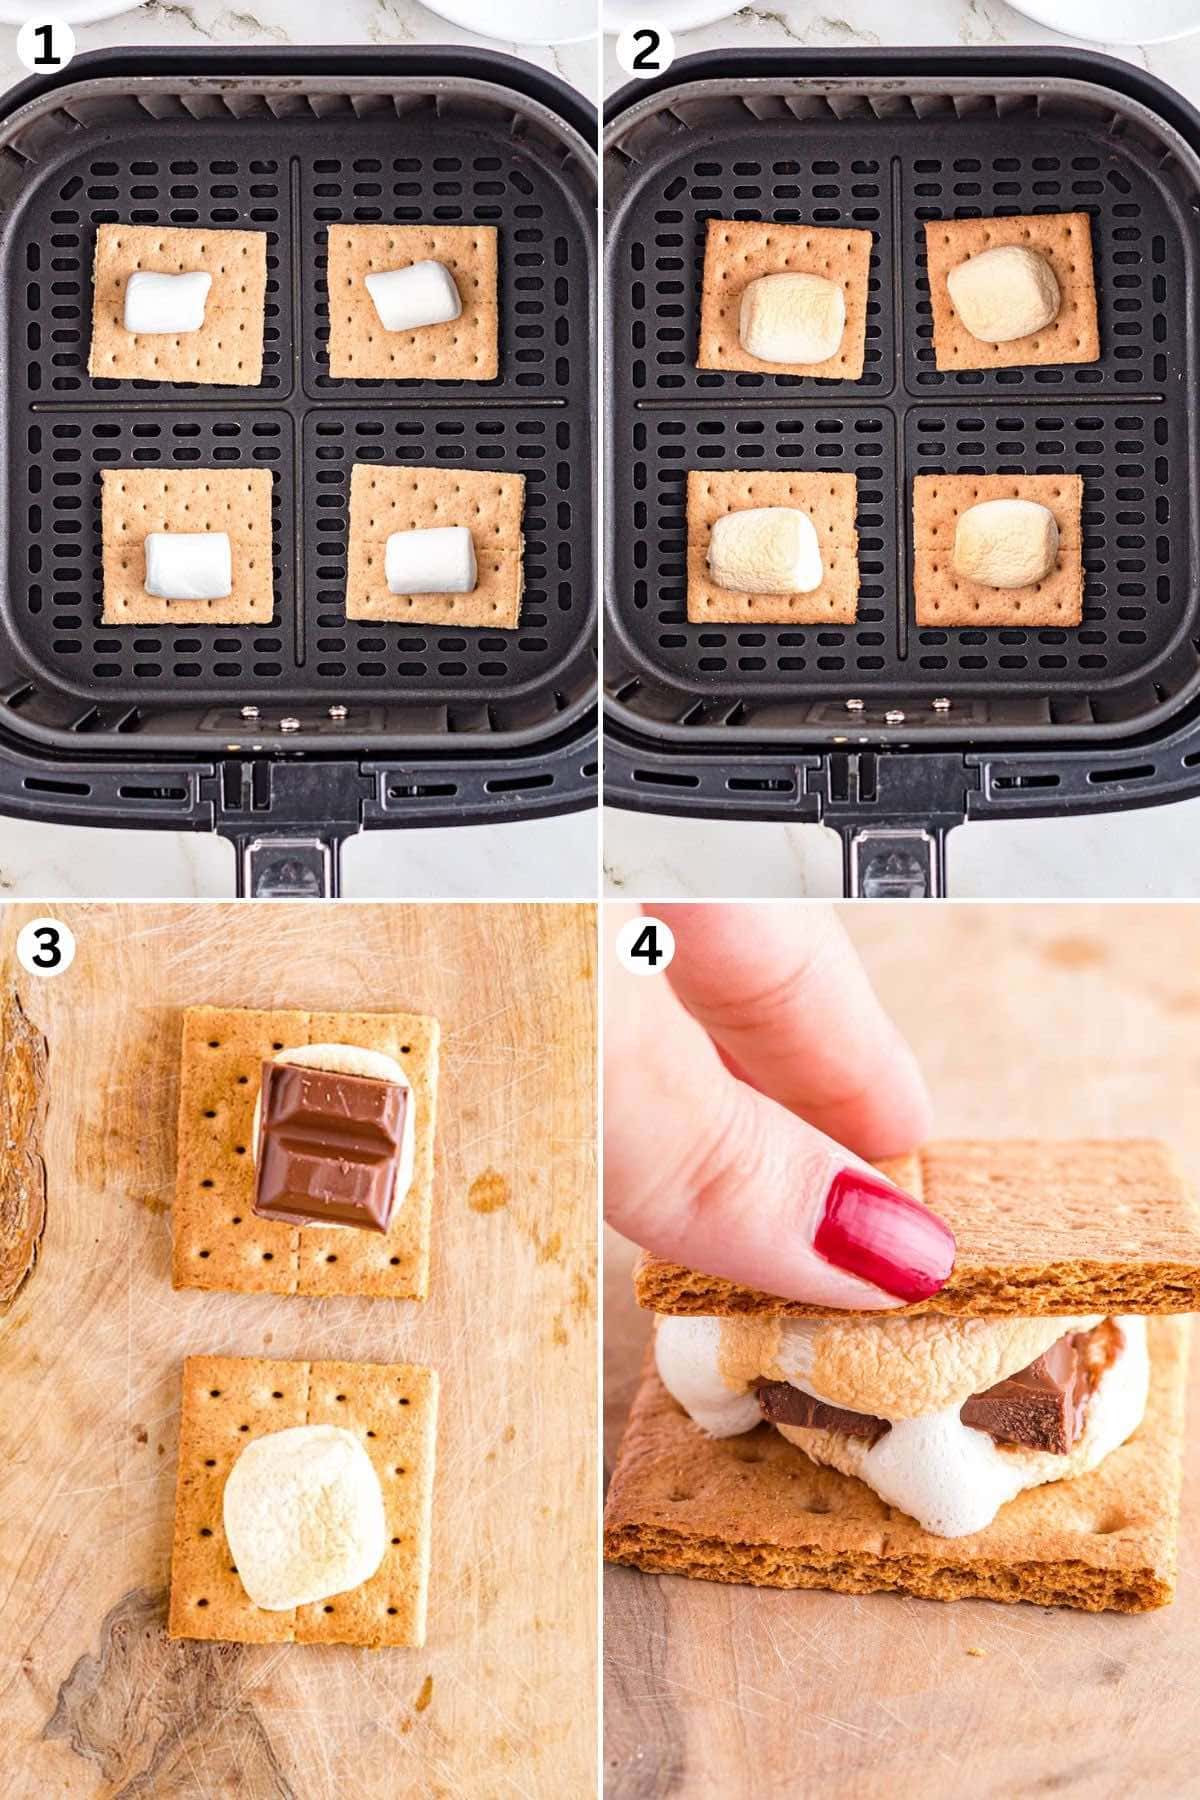 Place the crackers and marshmallow in the air fryer. Air fry the cracker. Remove from the air fryer then top with chocolate squares. Top the chocolate with the other graham cracker half.